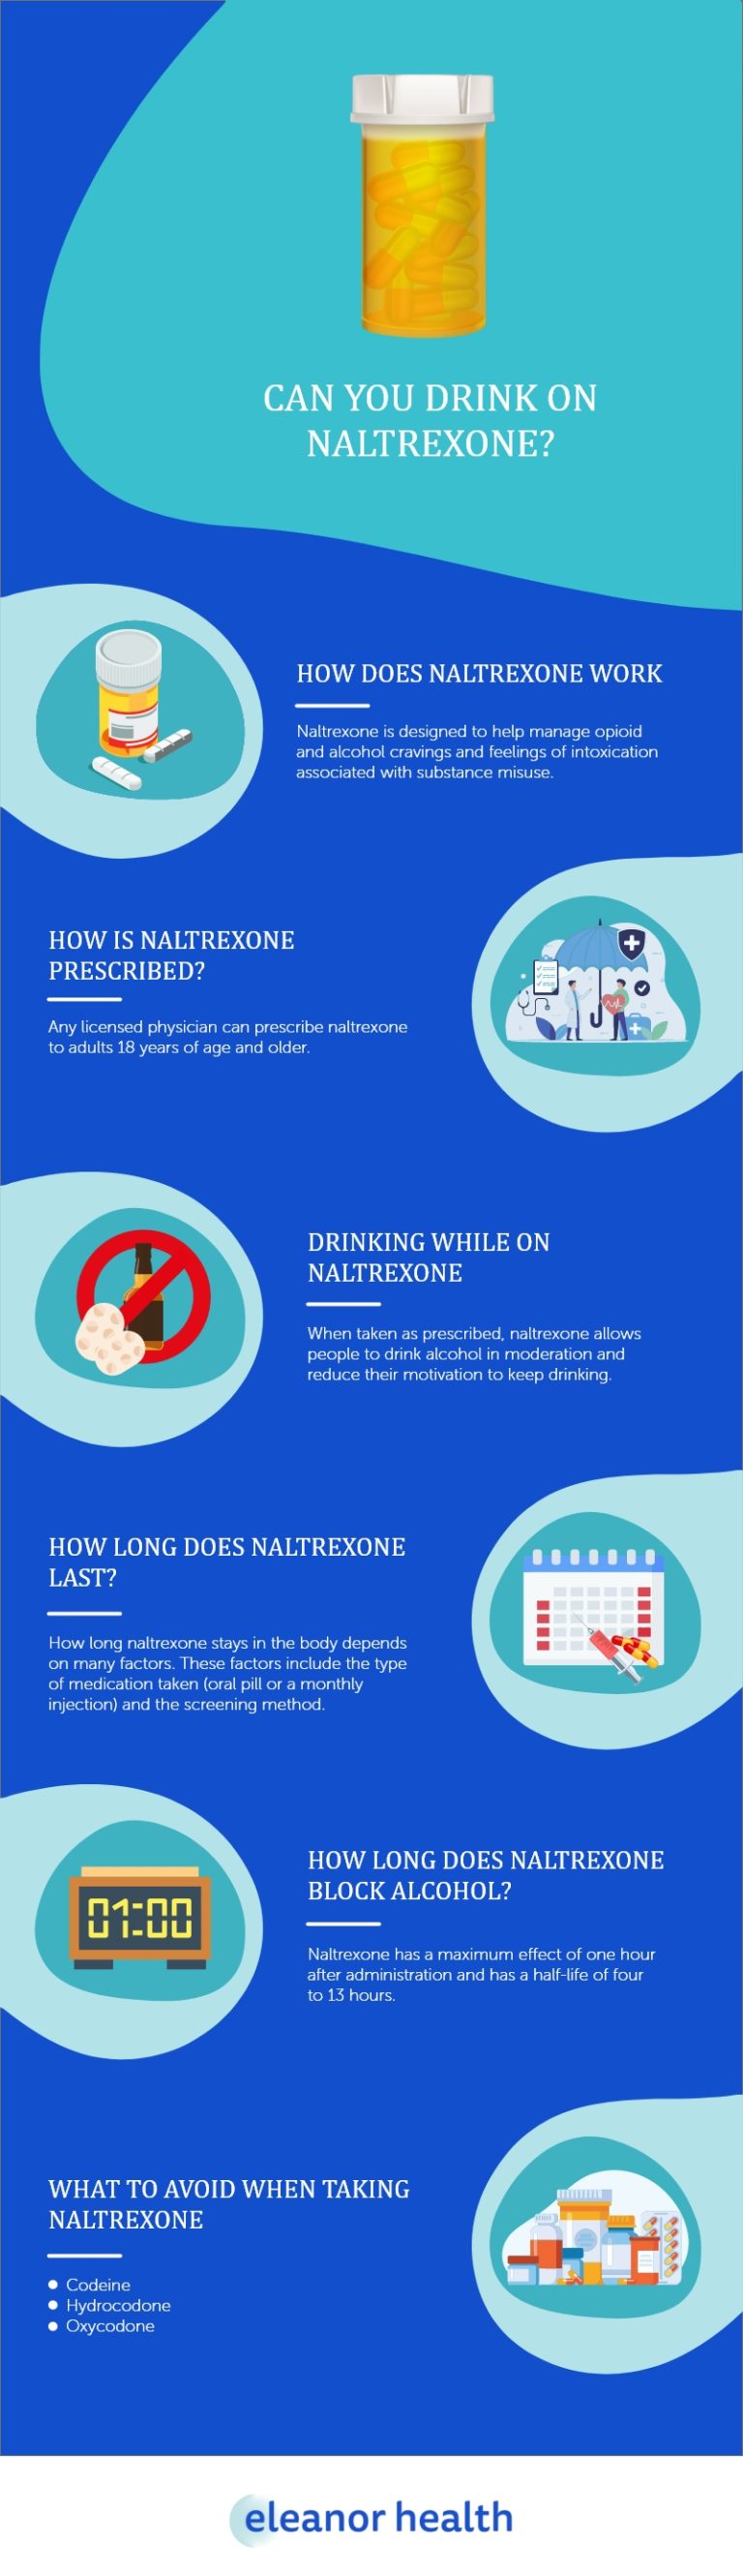 How Long Does Naltrexone Block Alcohol?